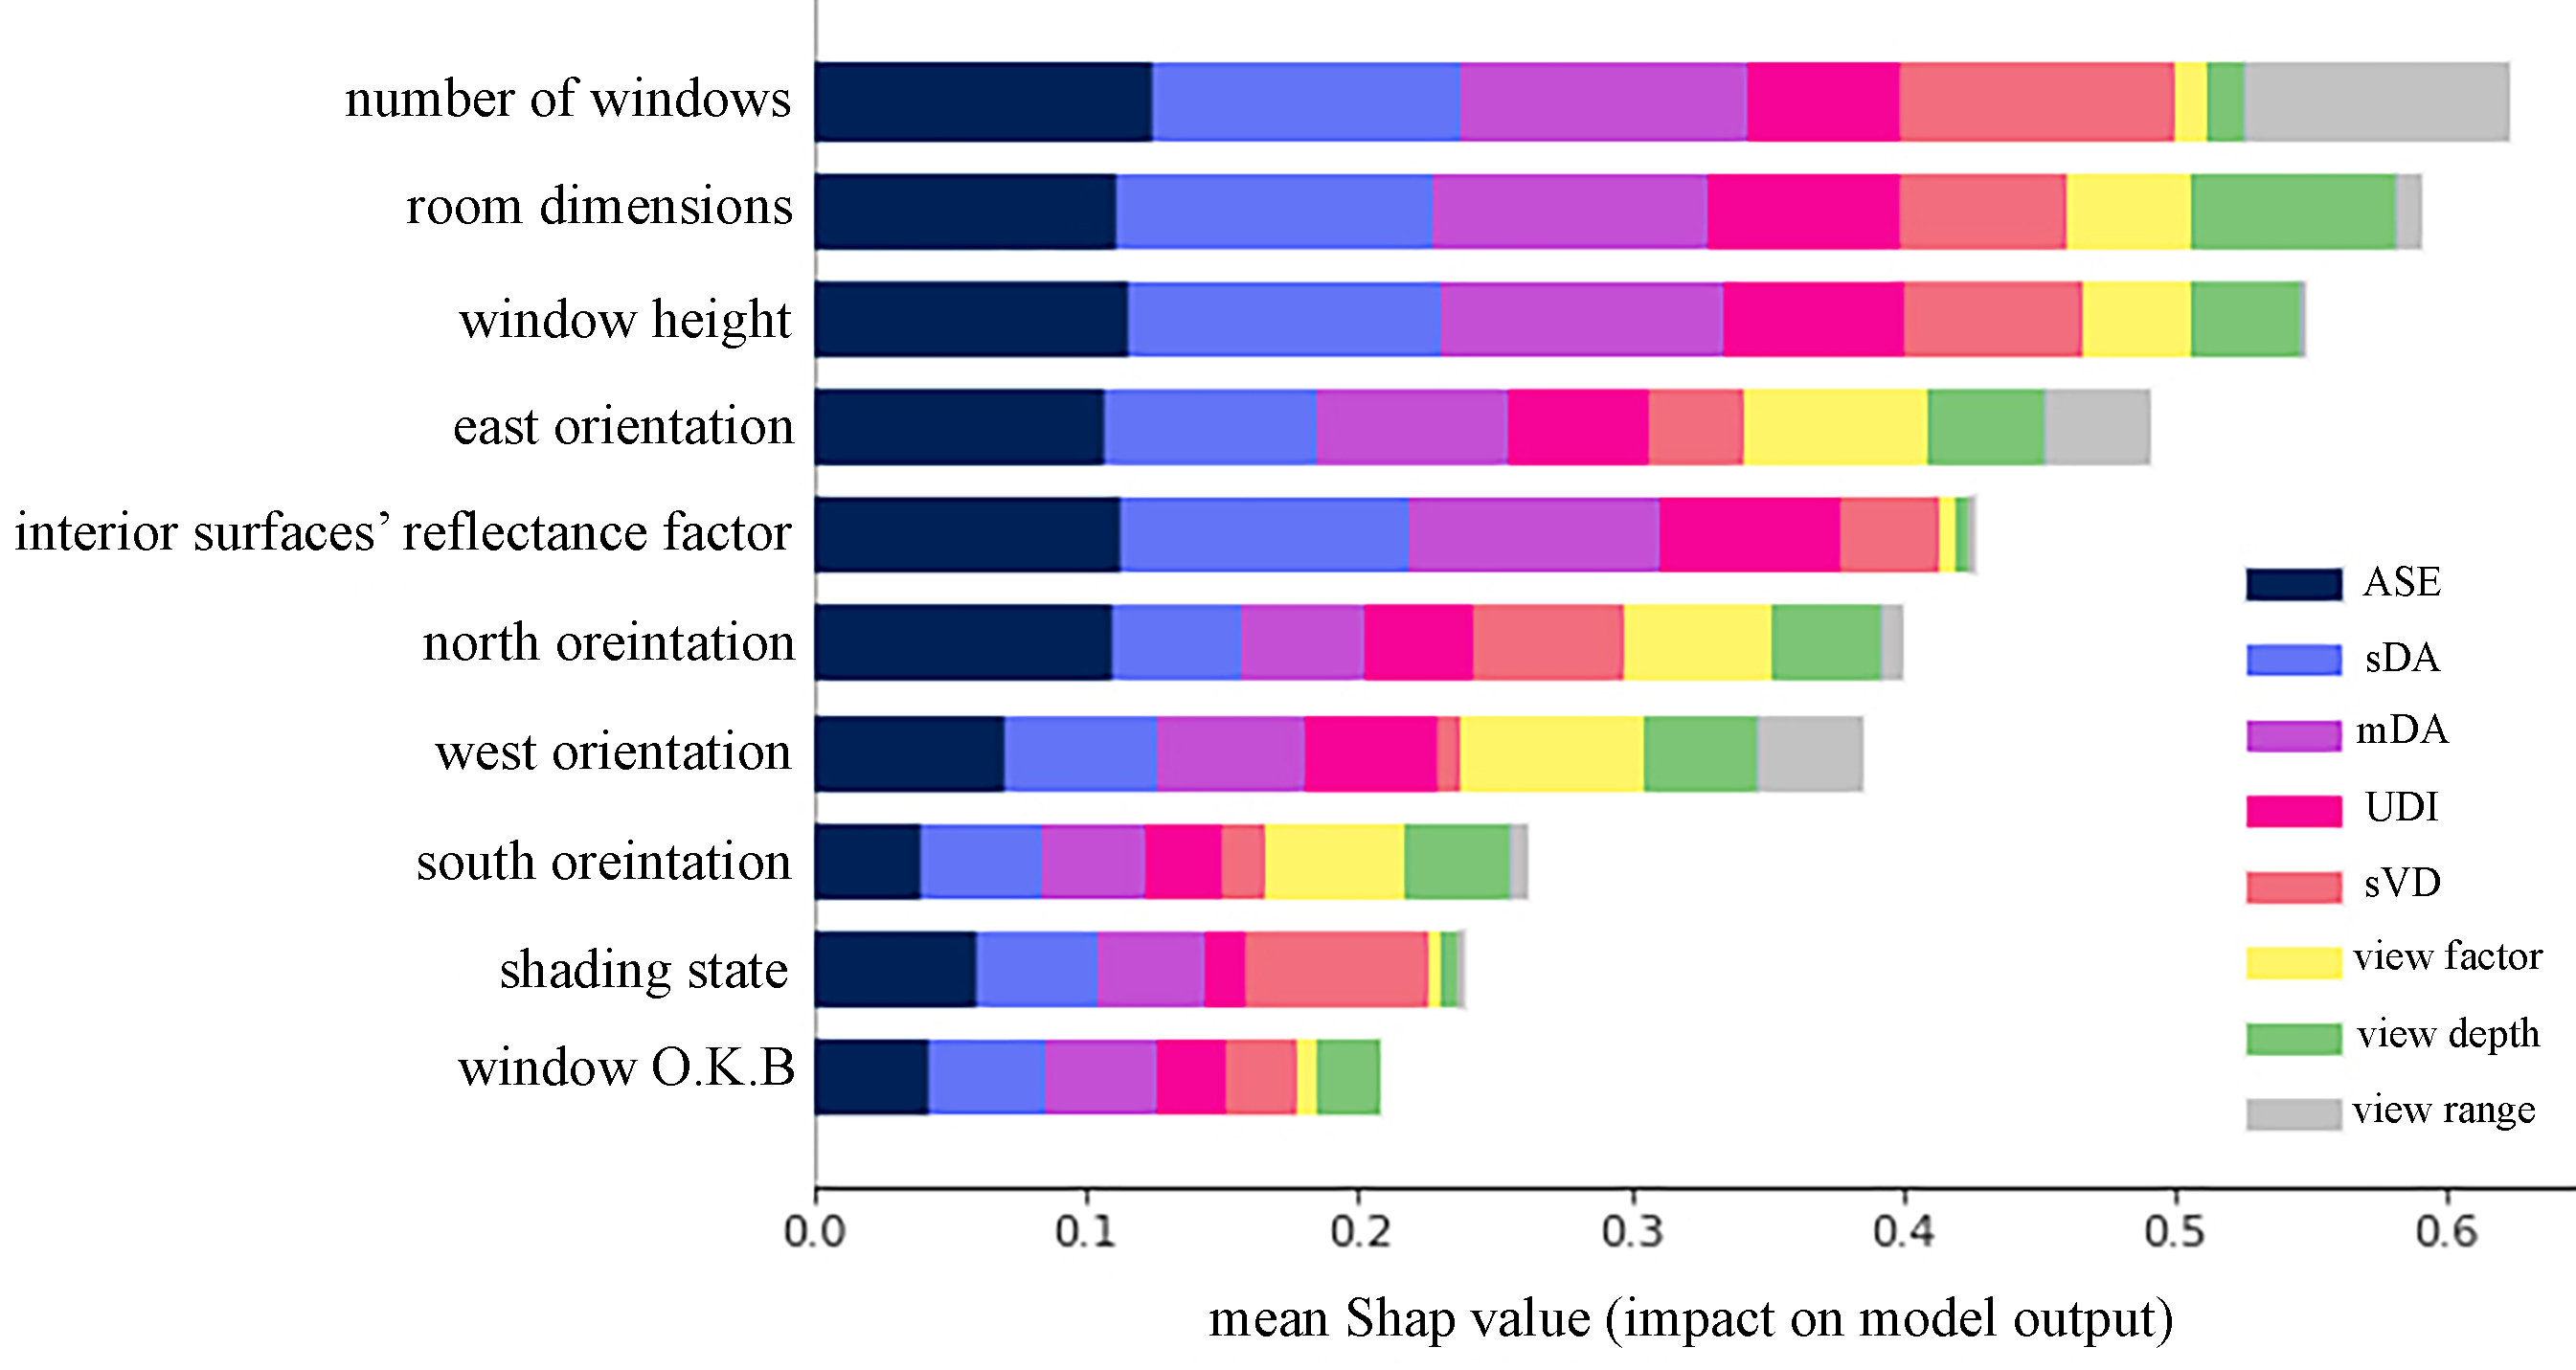 Overall Sensitivity analysis of the metrics to different variables using SHAP value.